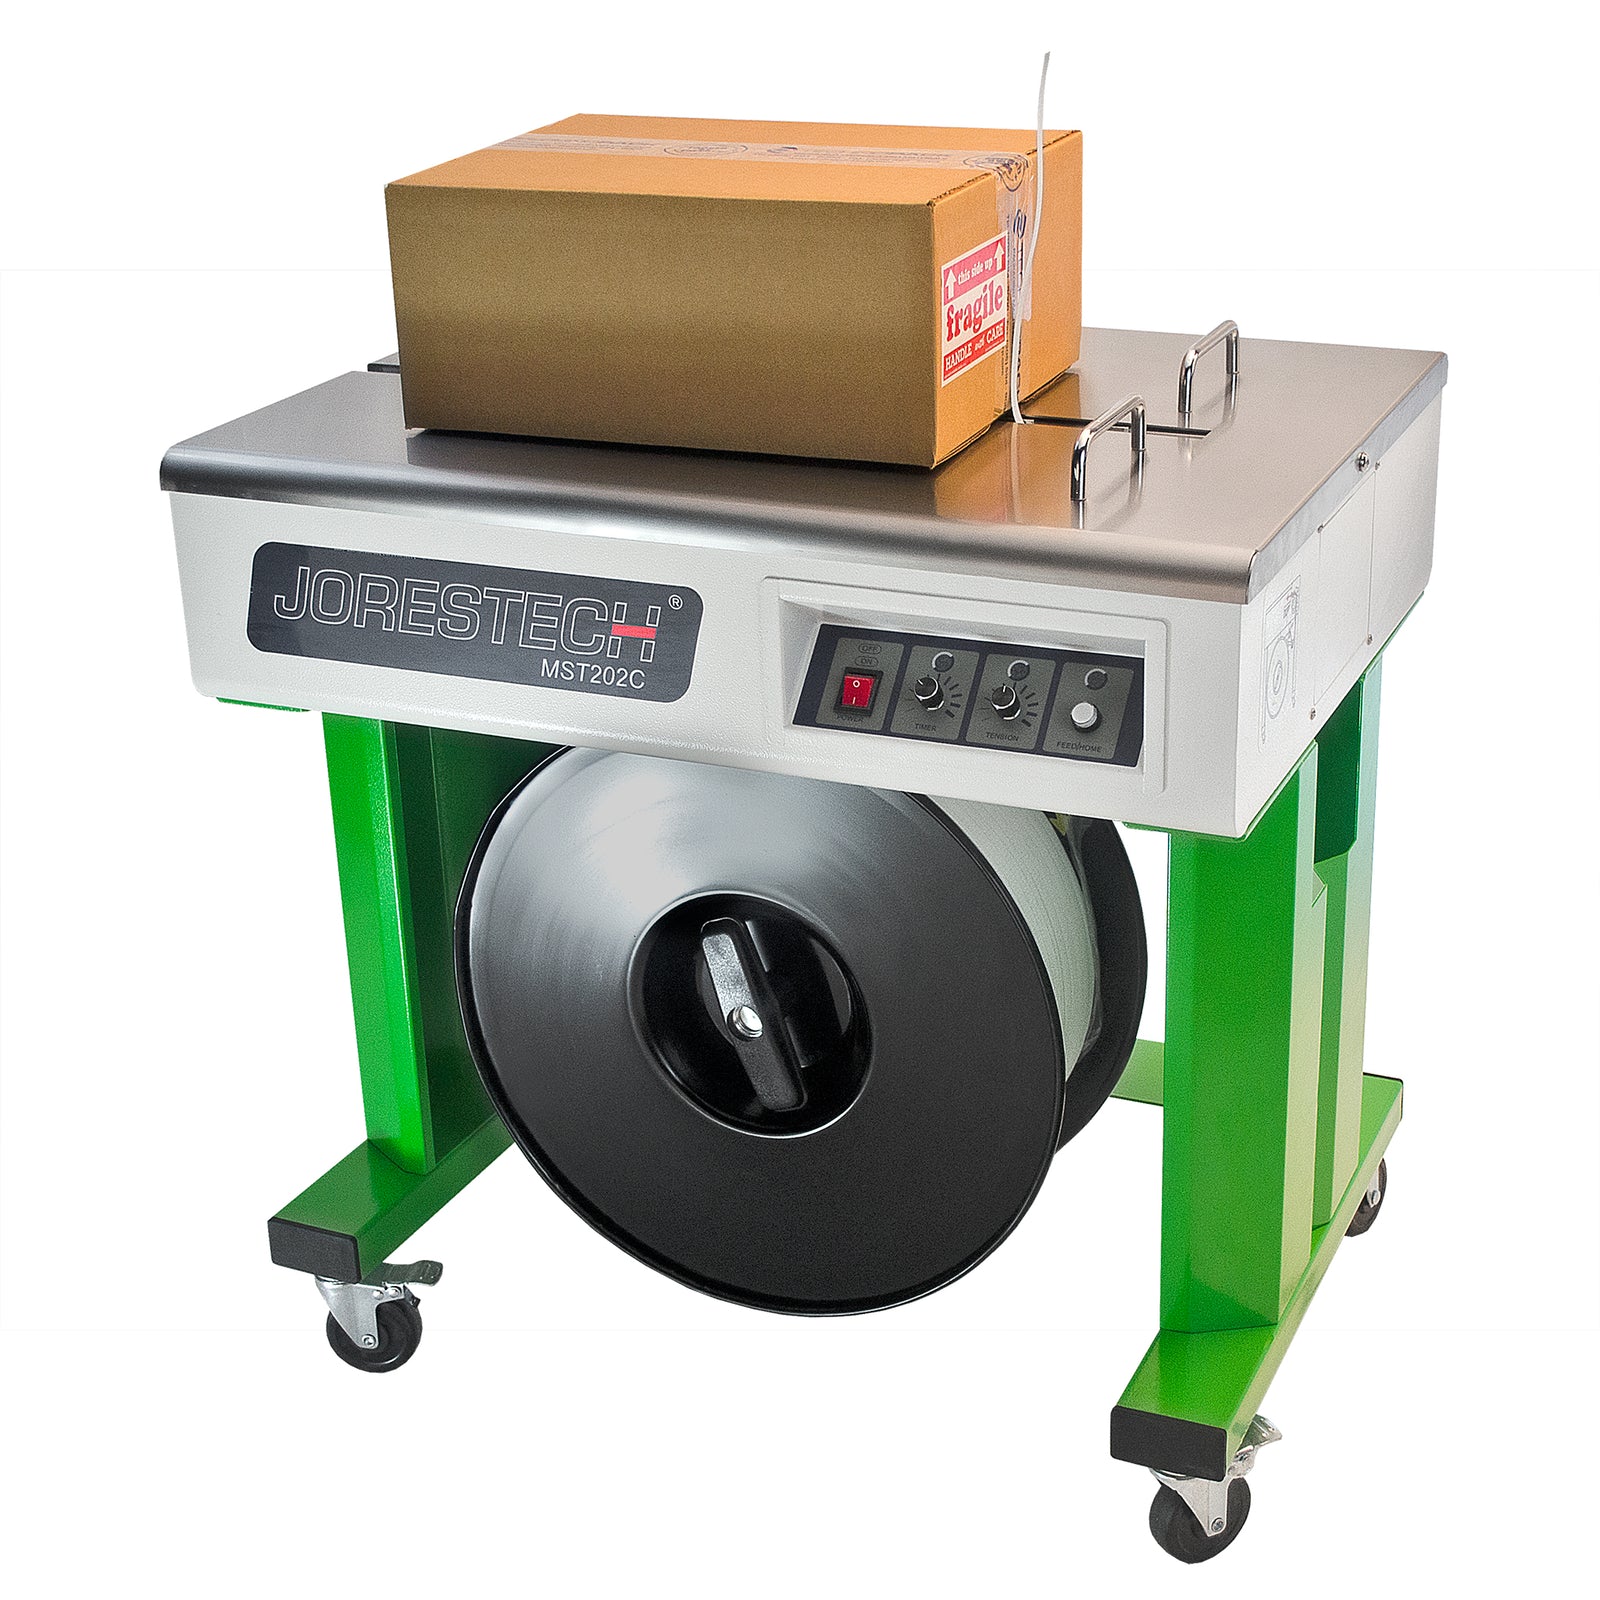 A JORES TECHNOLOGIES® semi automatic strapping machine ready to strap a card box located on the stainless steel strapping working area